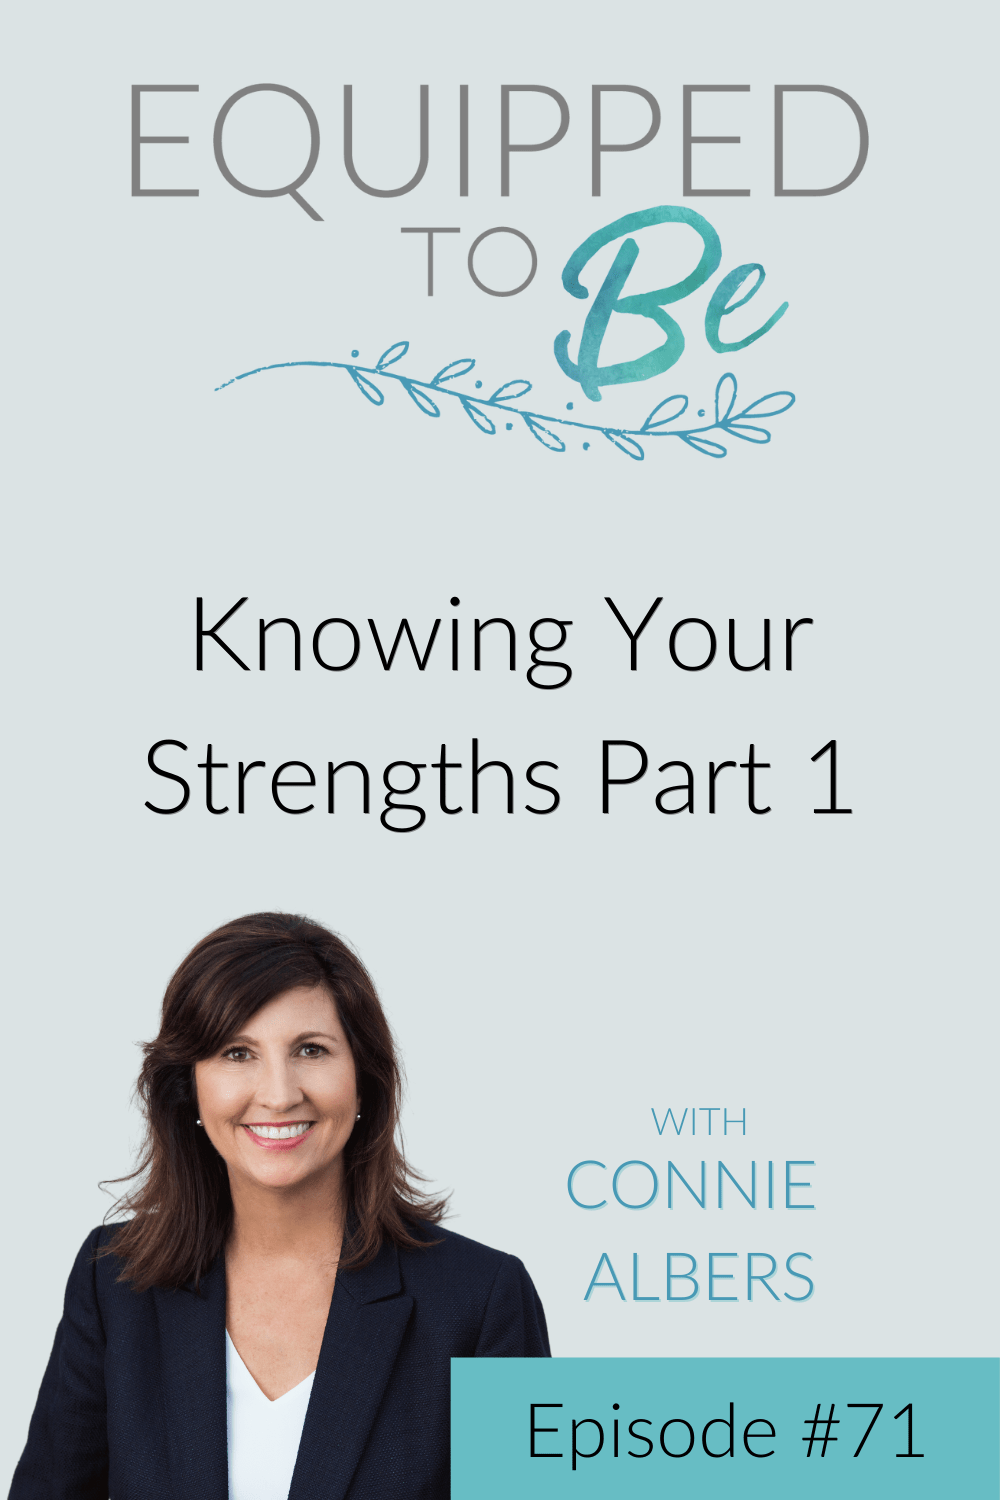 Knowing Your Strengths Part 1 - ETB #71